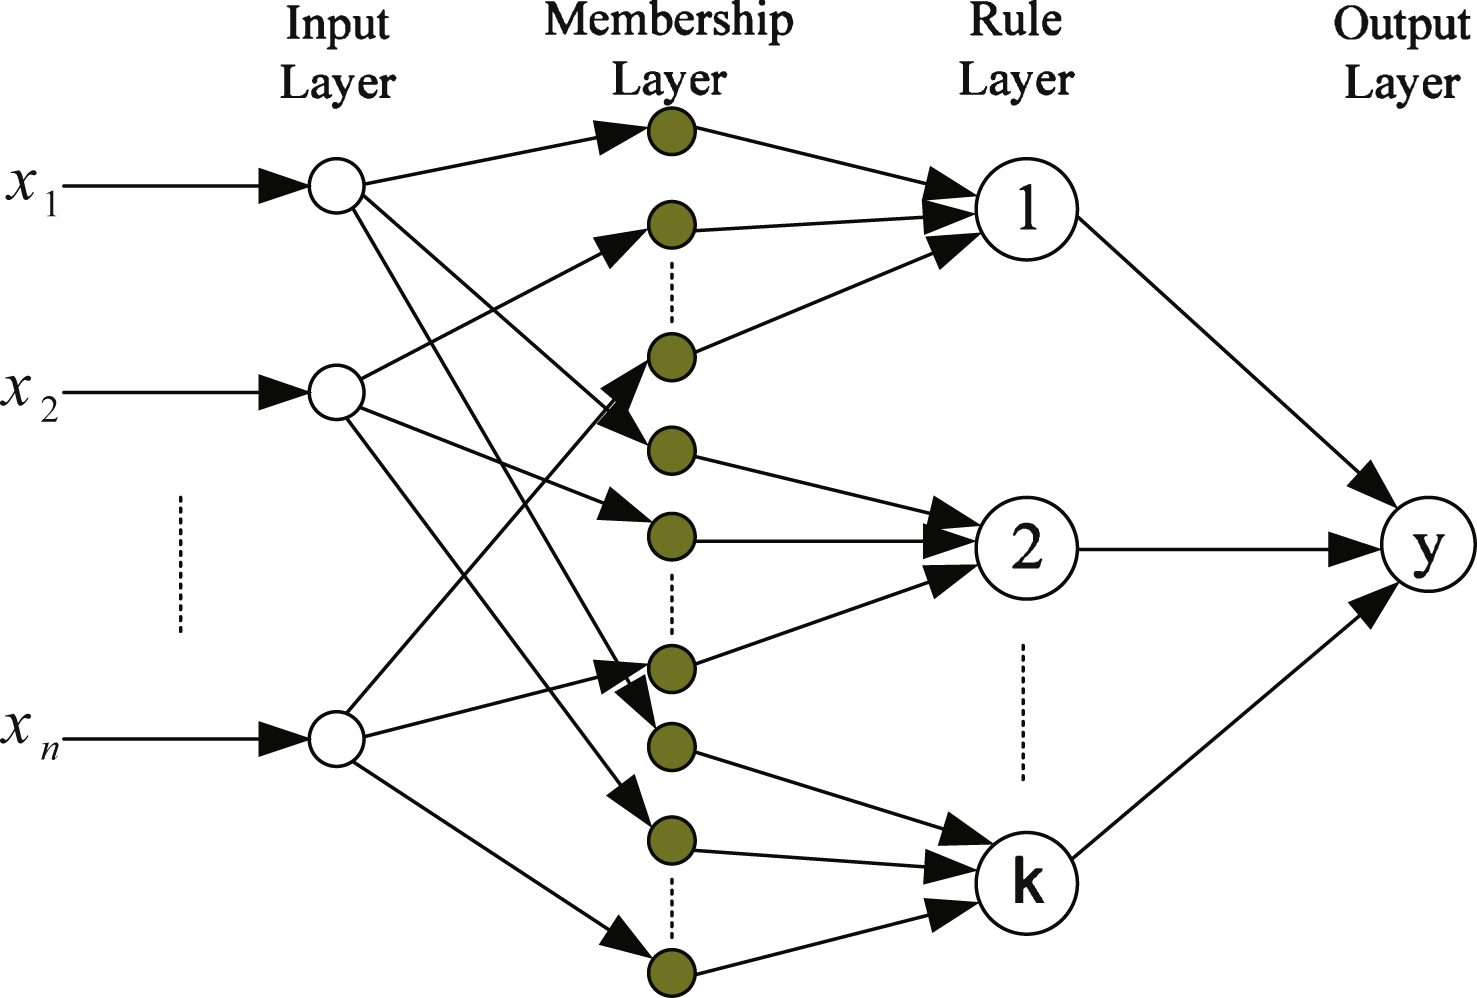 Adaptive network-based fuzzy inference system.